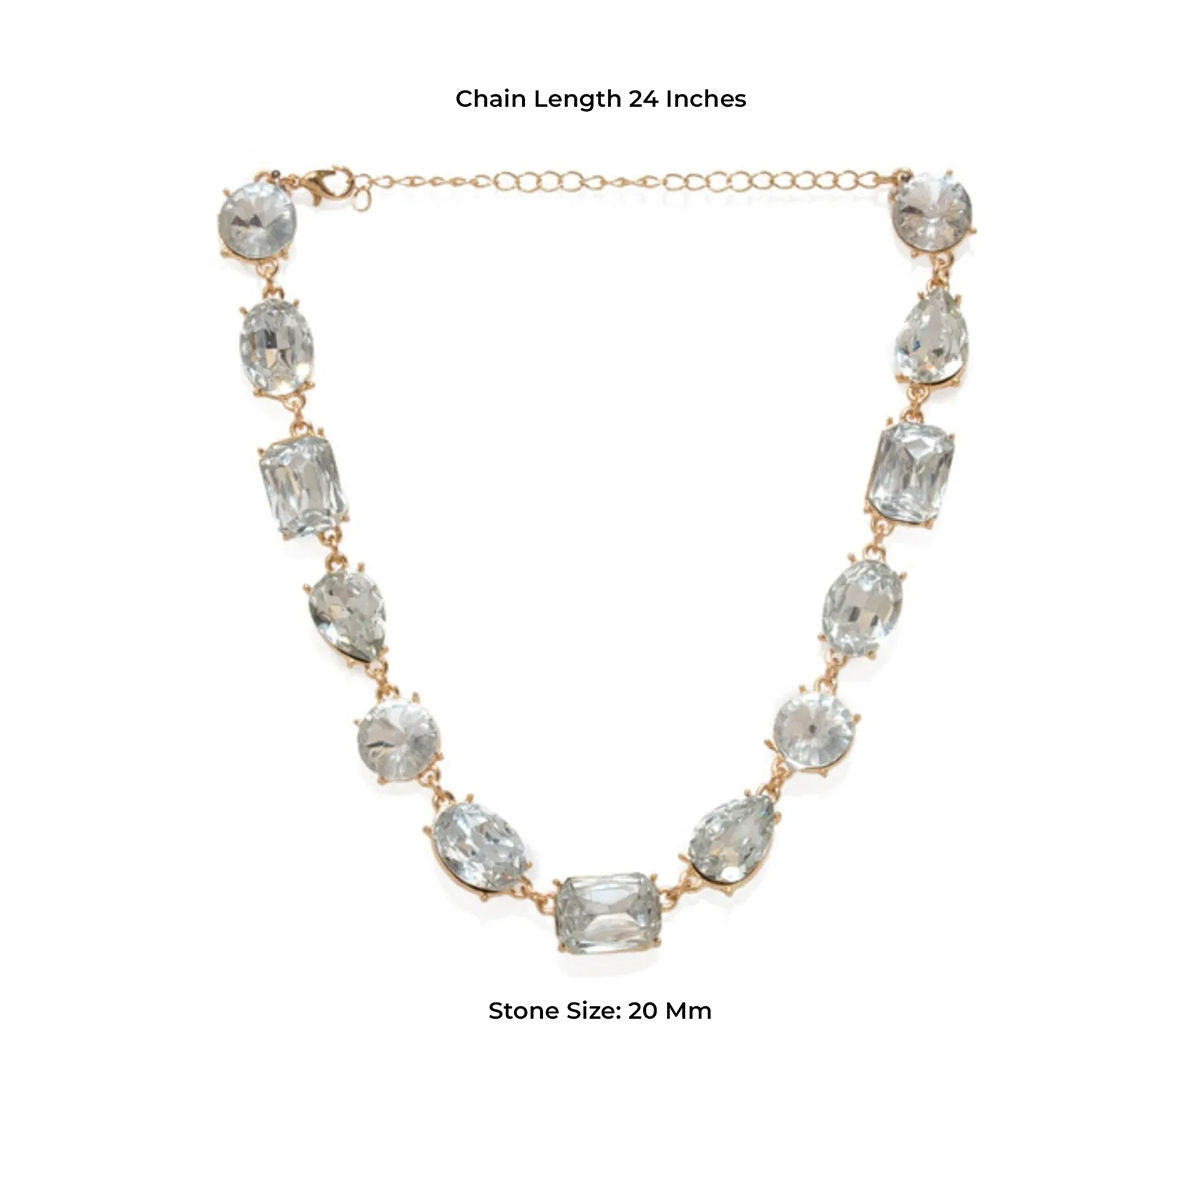 Pipa Bella Choker Embellished With Uncut Stones In White